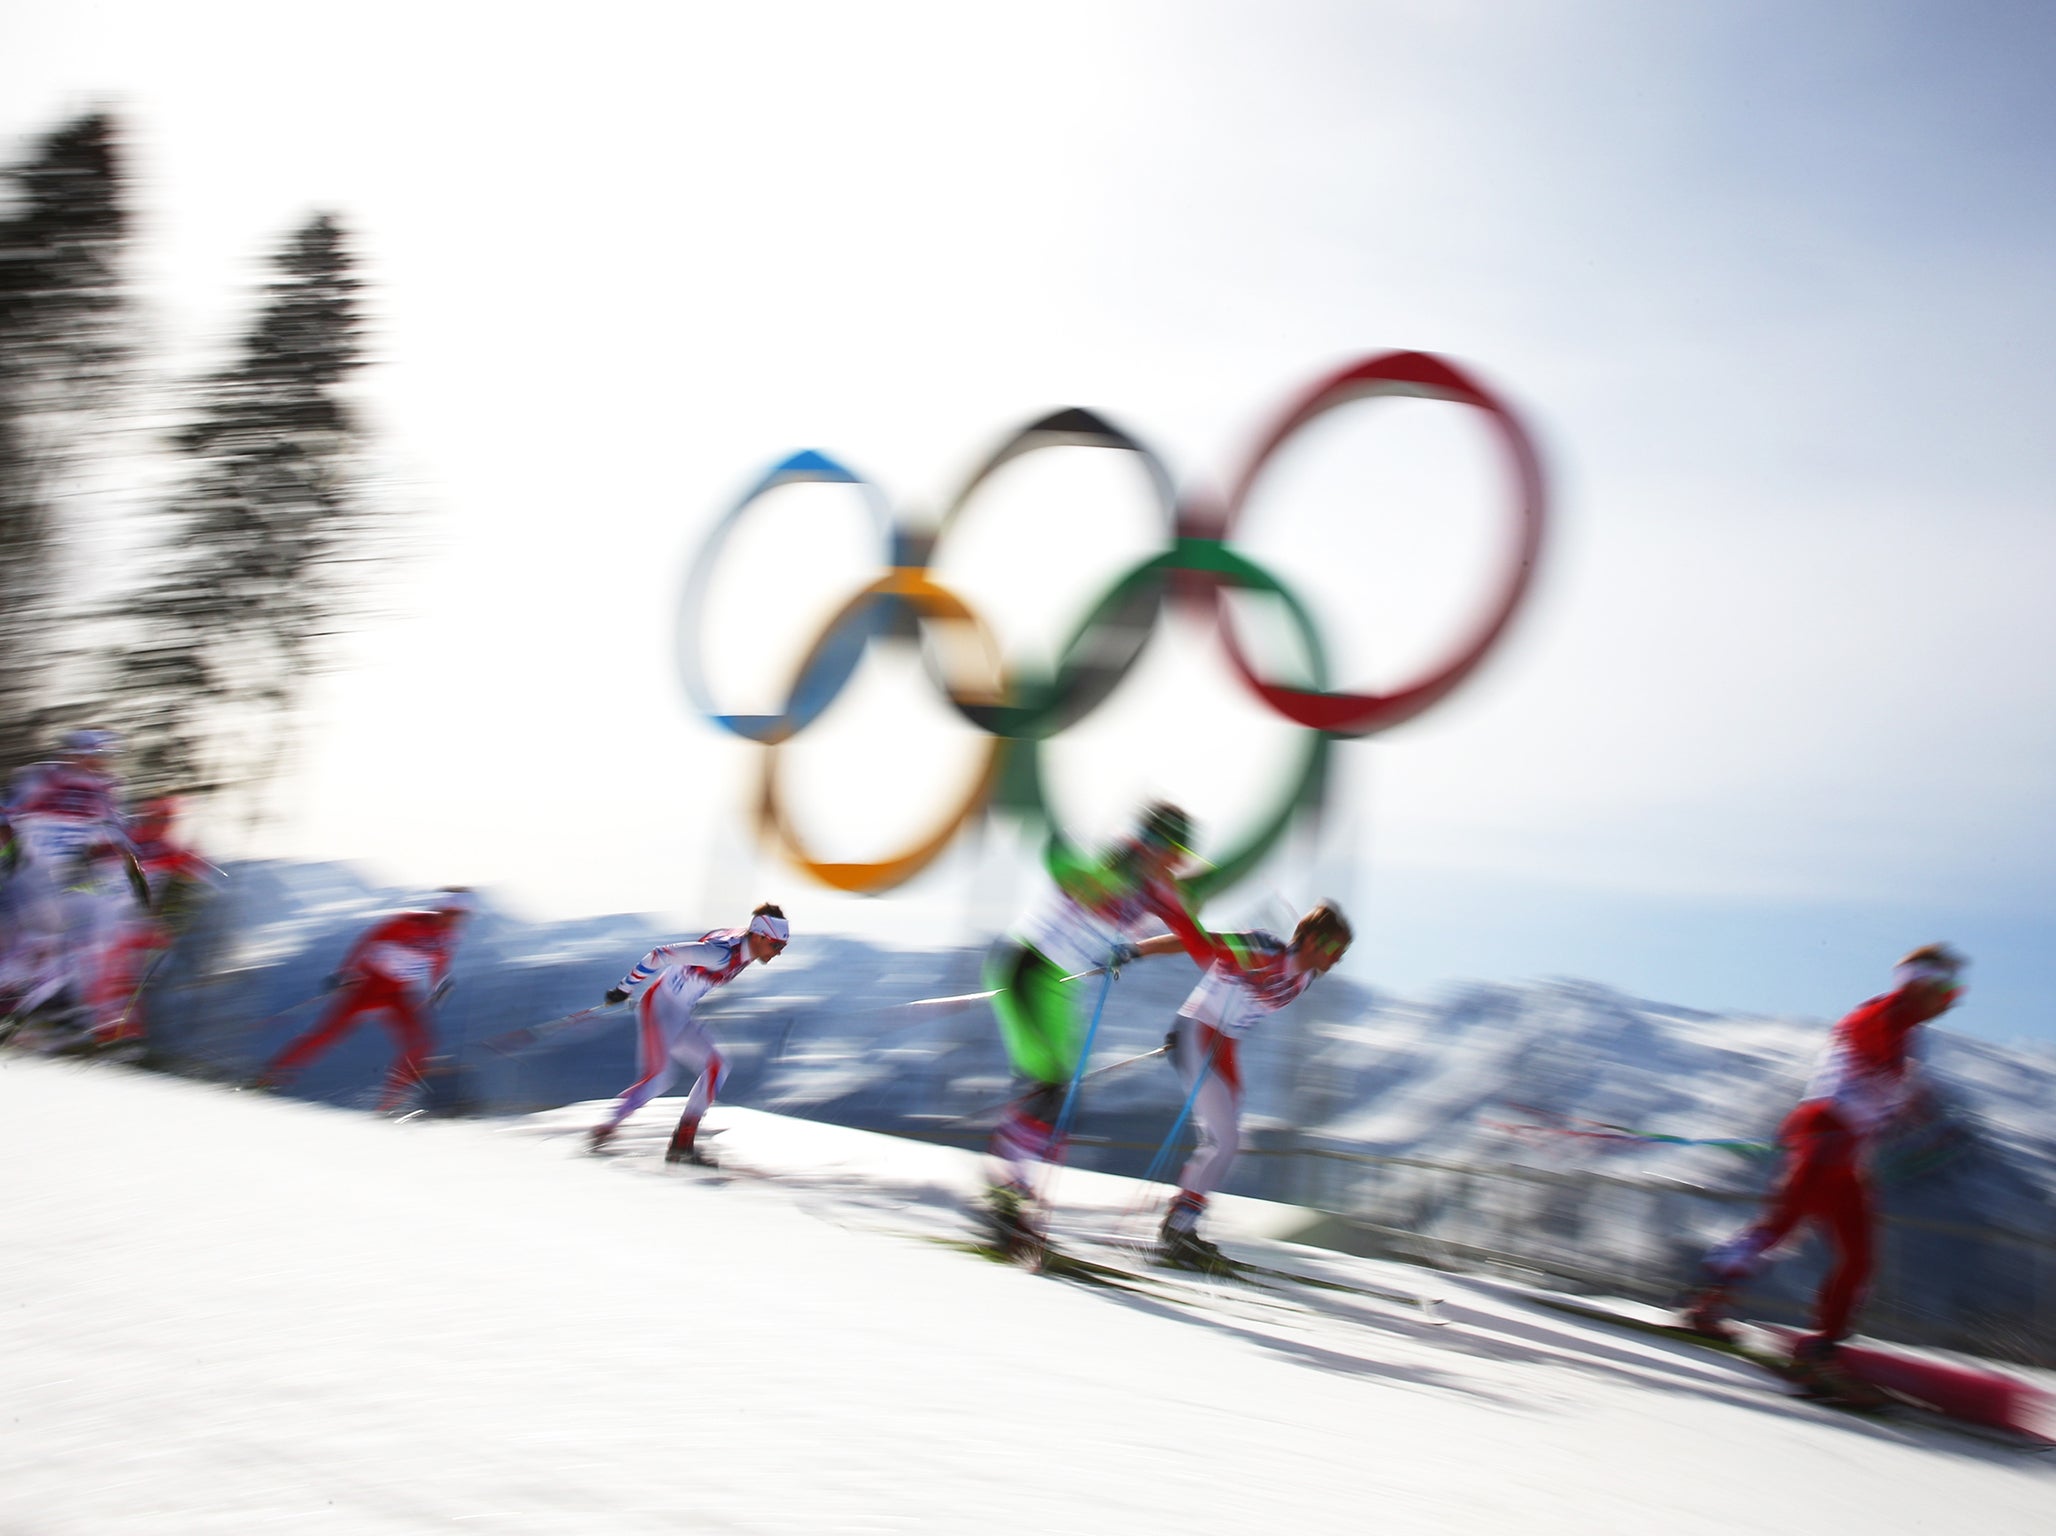 Russia could be thrown out of the 2018 Winter Olympics